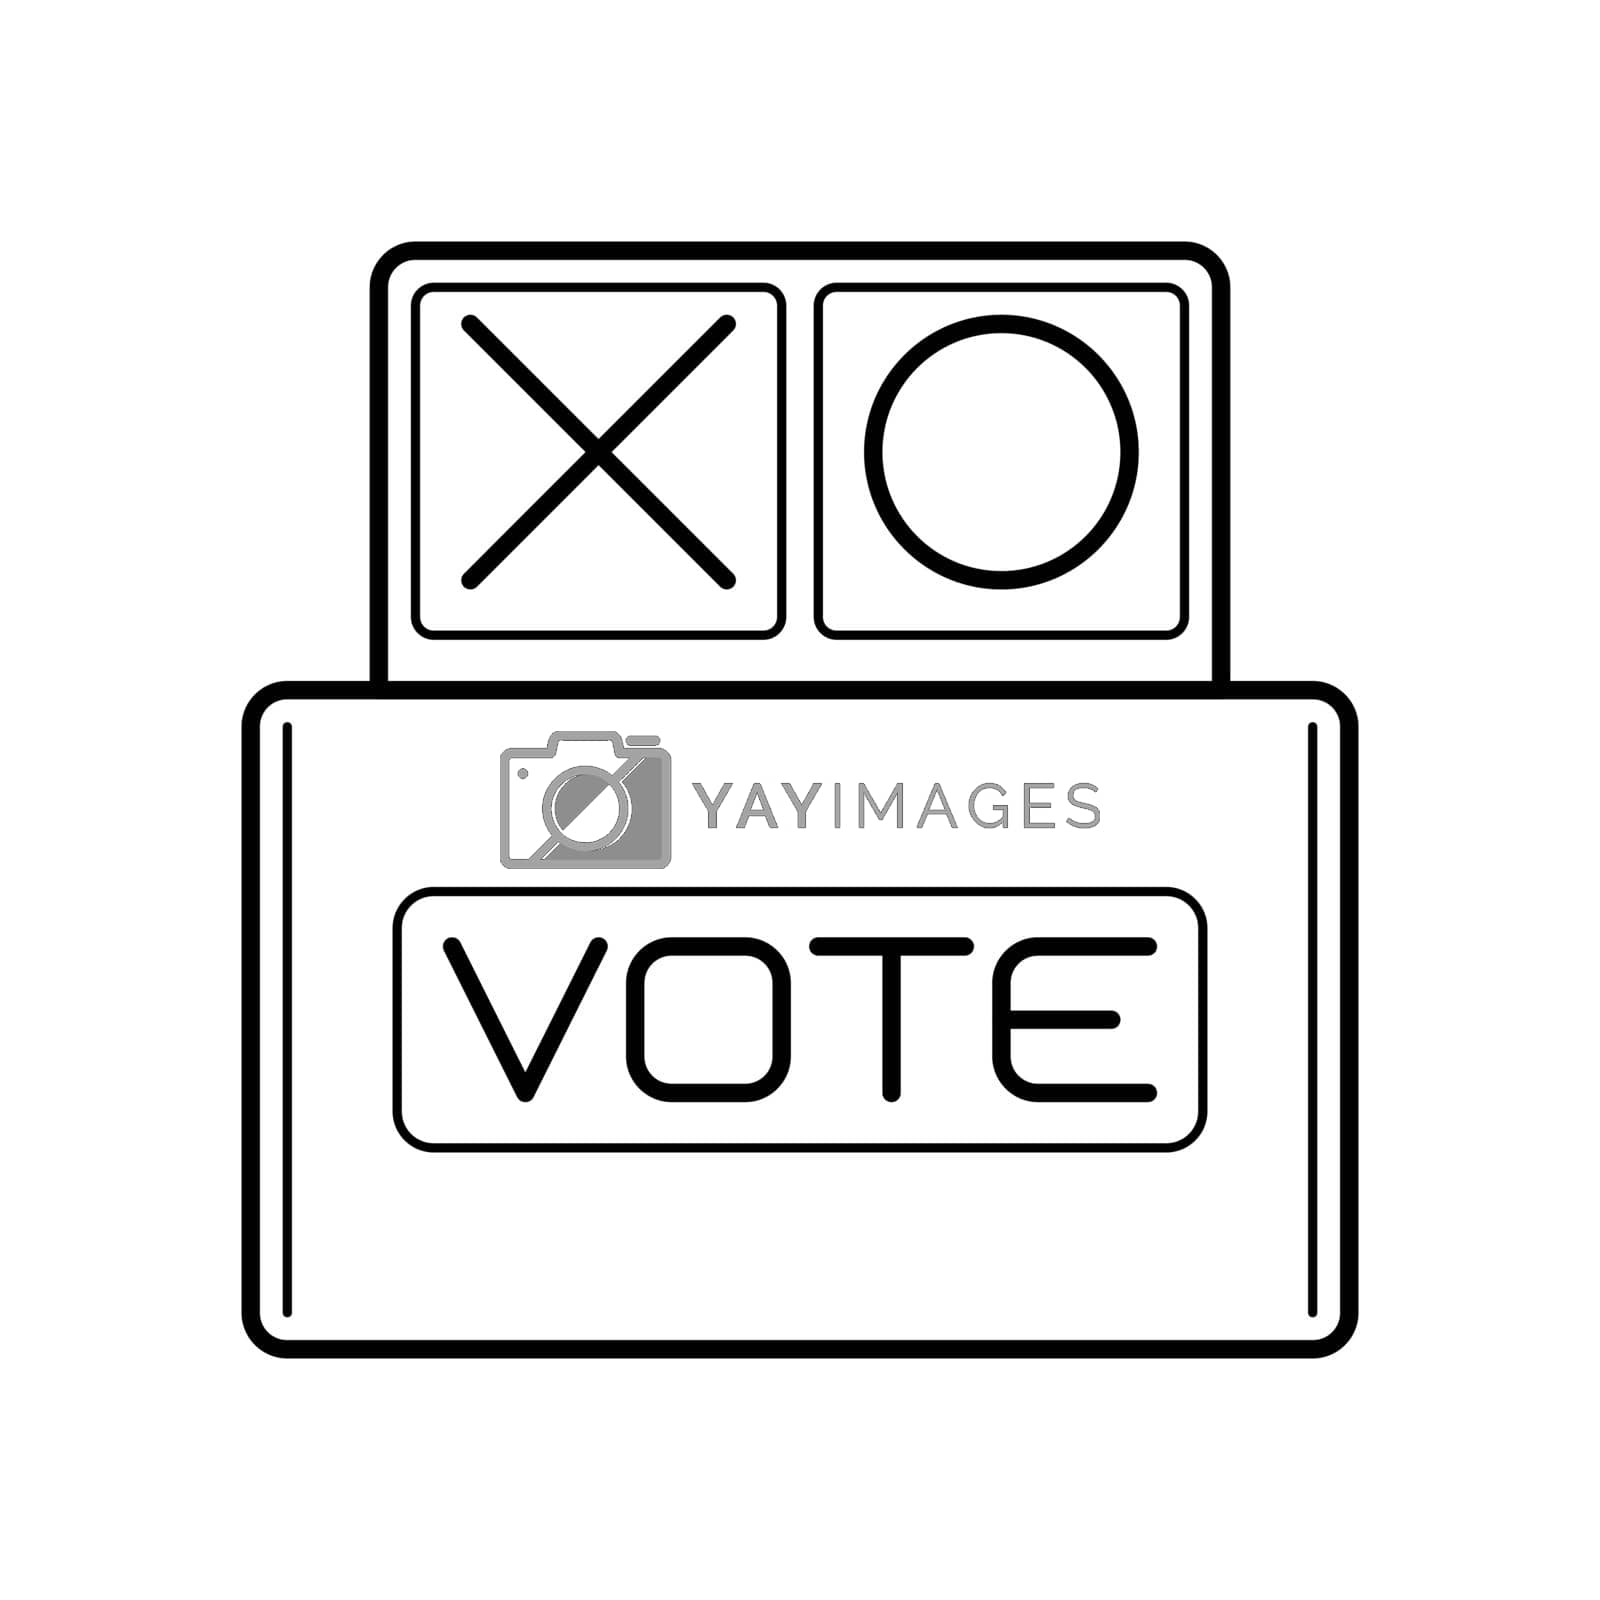 Royalty free image of election box icon for the new presidential election by adityaslogos